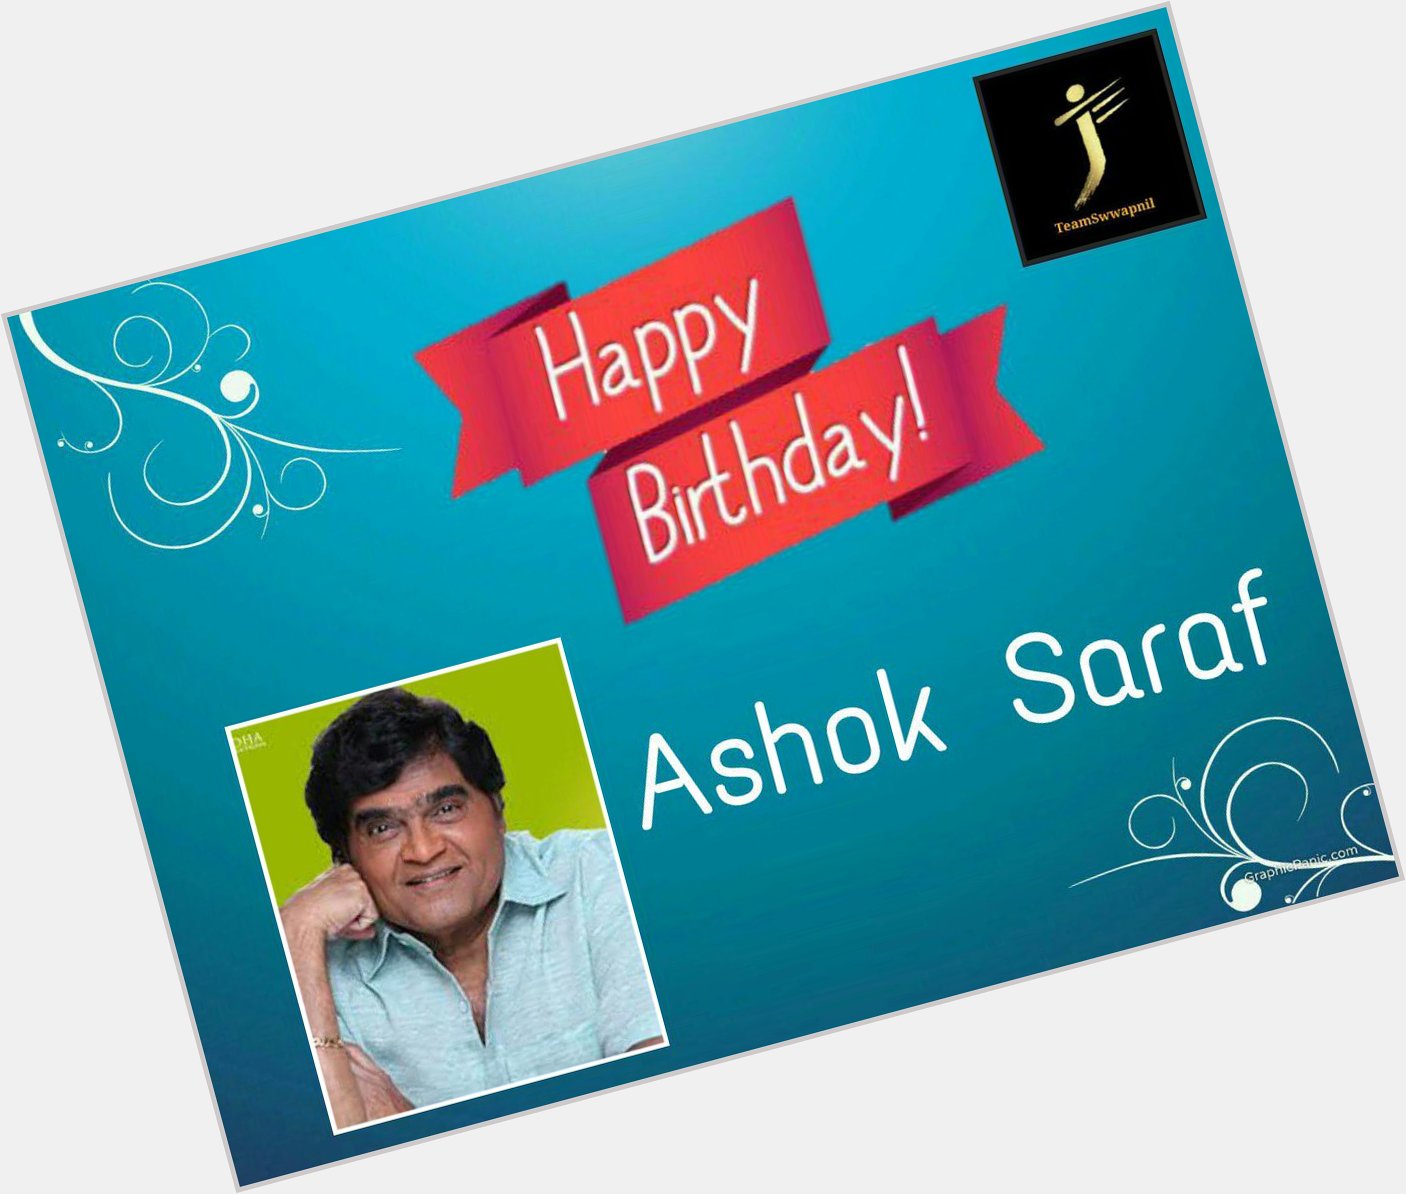 Wishing a very happy birthday to the greatest actor of our times Ashok Saraf Sir! love and happiness :) 